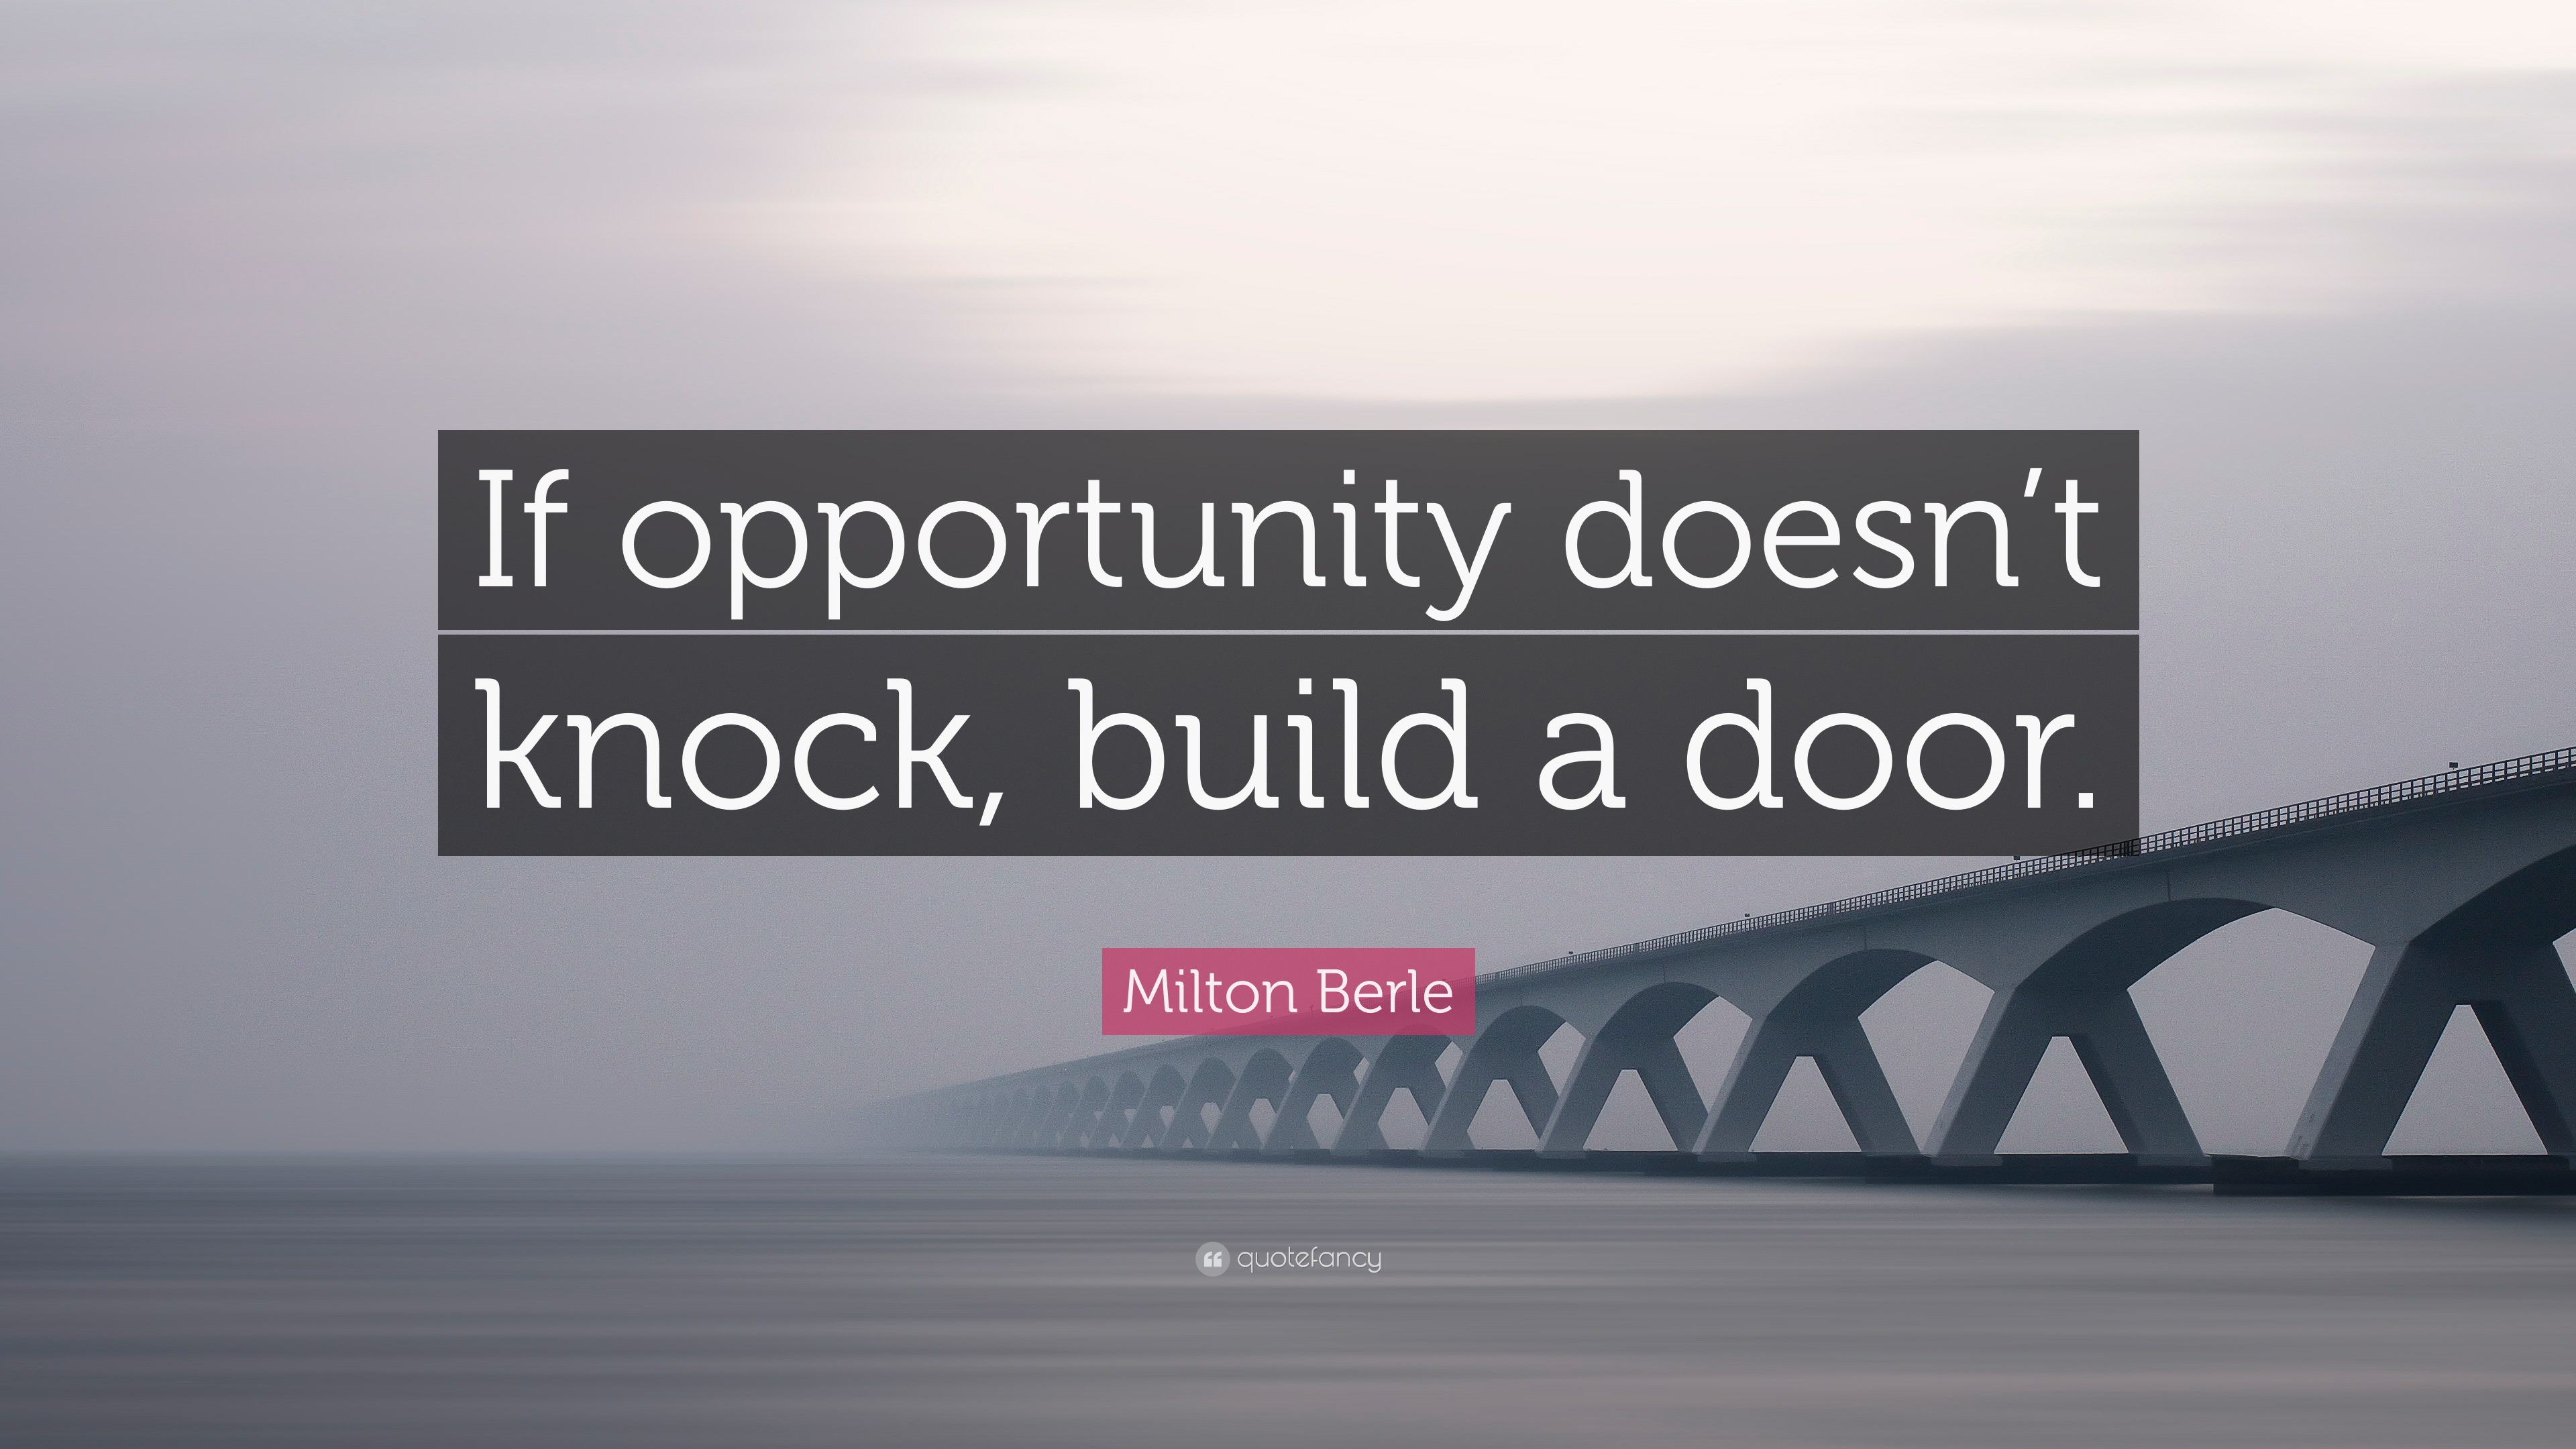 4676750 Milton Berle Quote If opportunity doesn t knock build a door